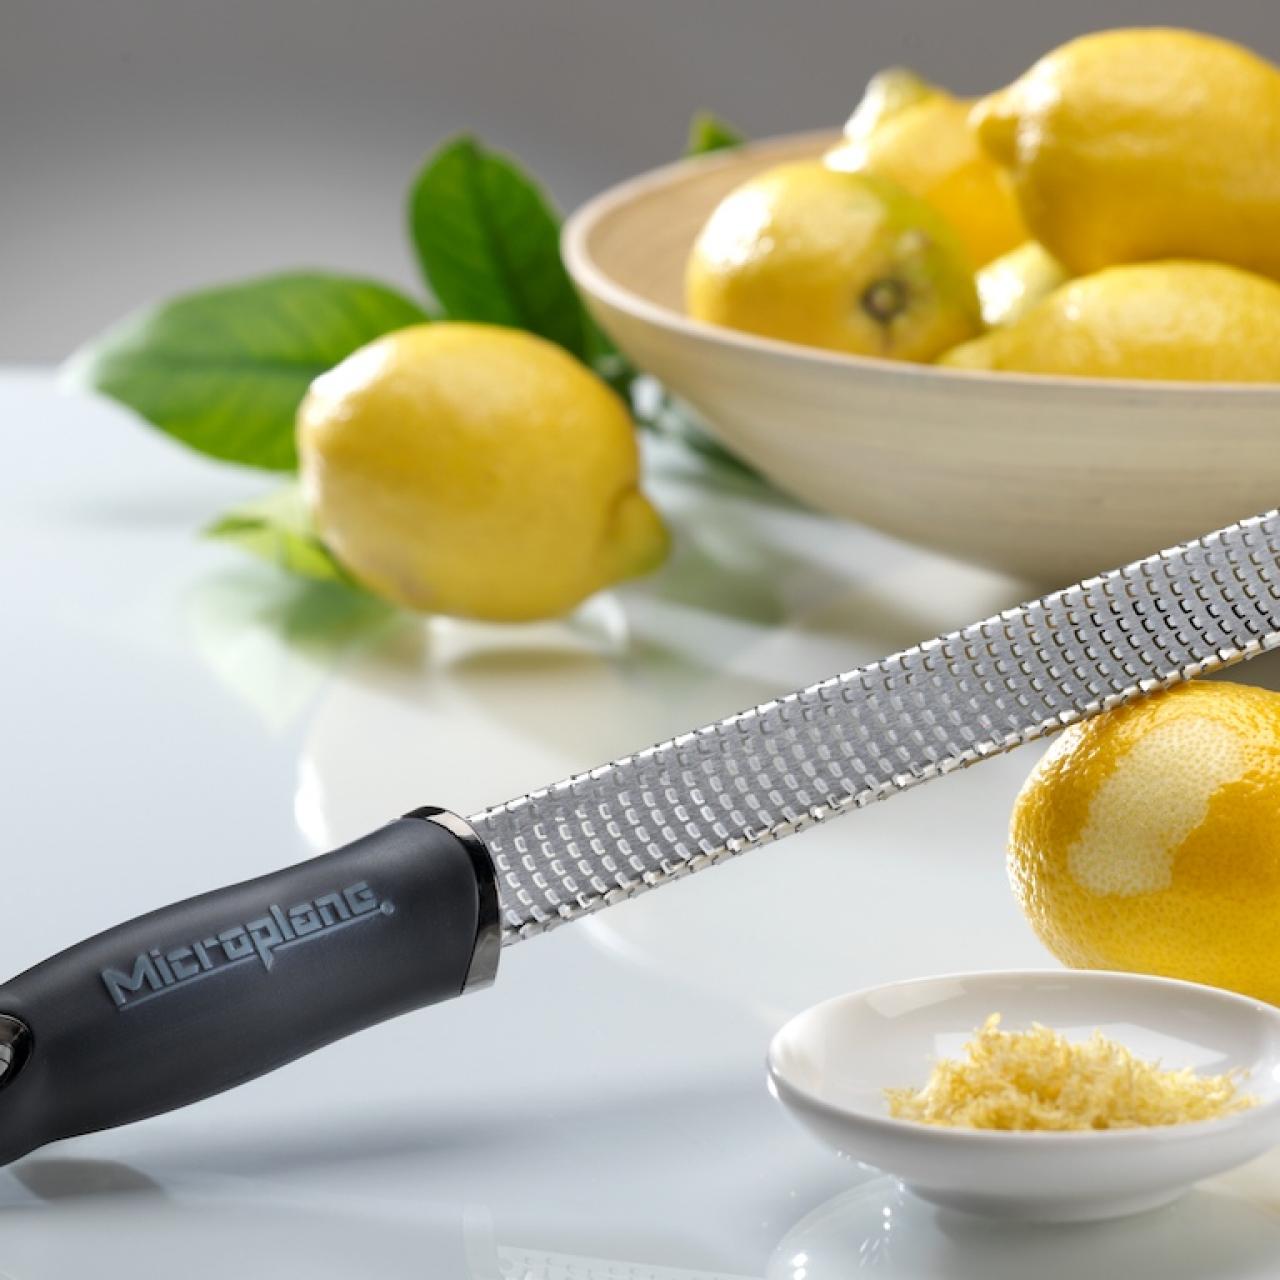 Exclusive Limited Edition Microplane Grater-Zester with Sugar